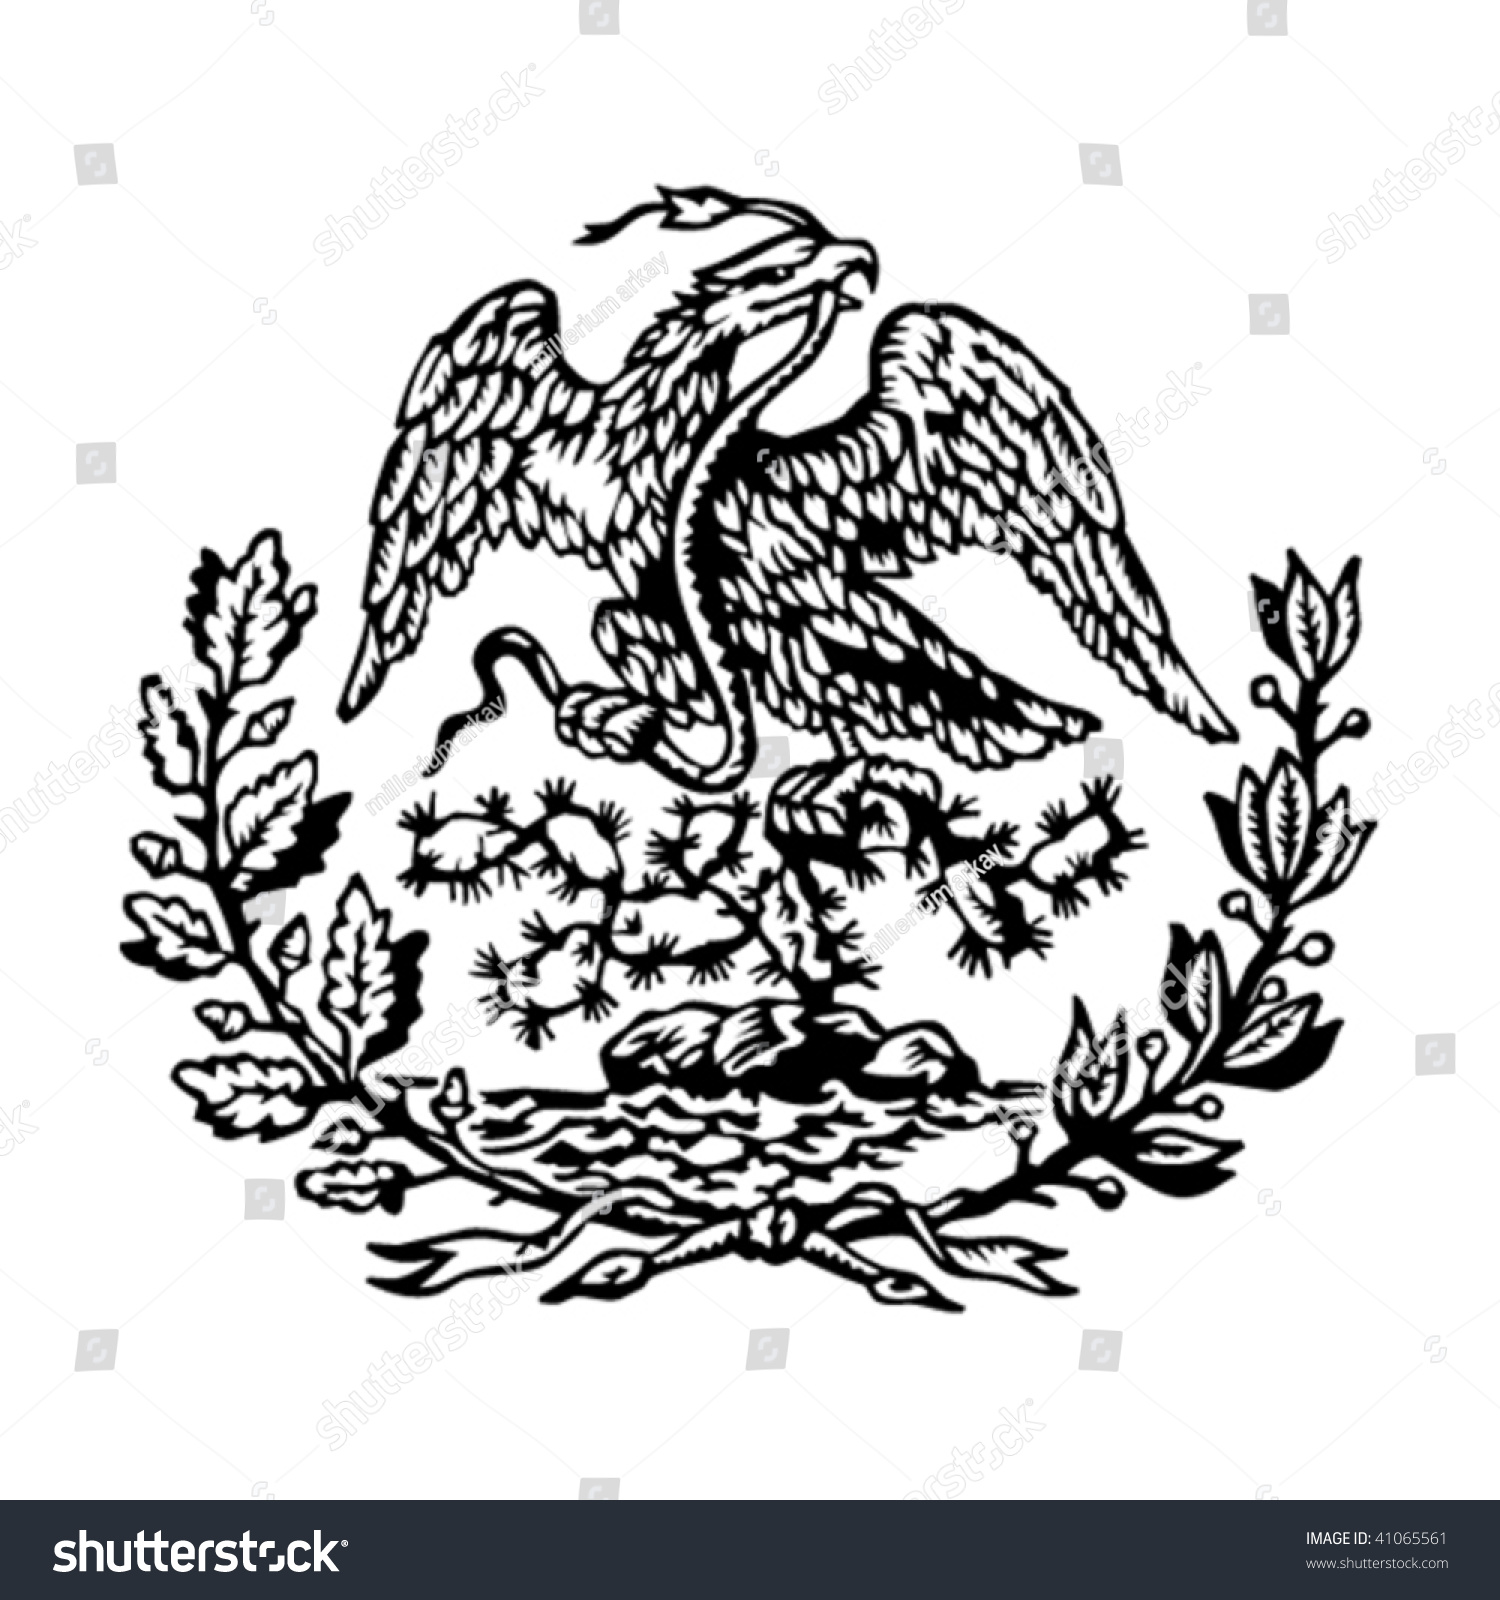 Mexican Coat Of Arms Stock Vector Illustration 41065561 : Shutterstock